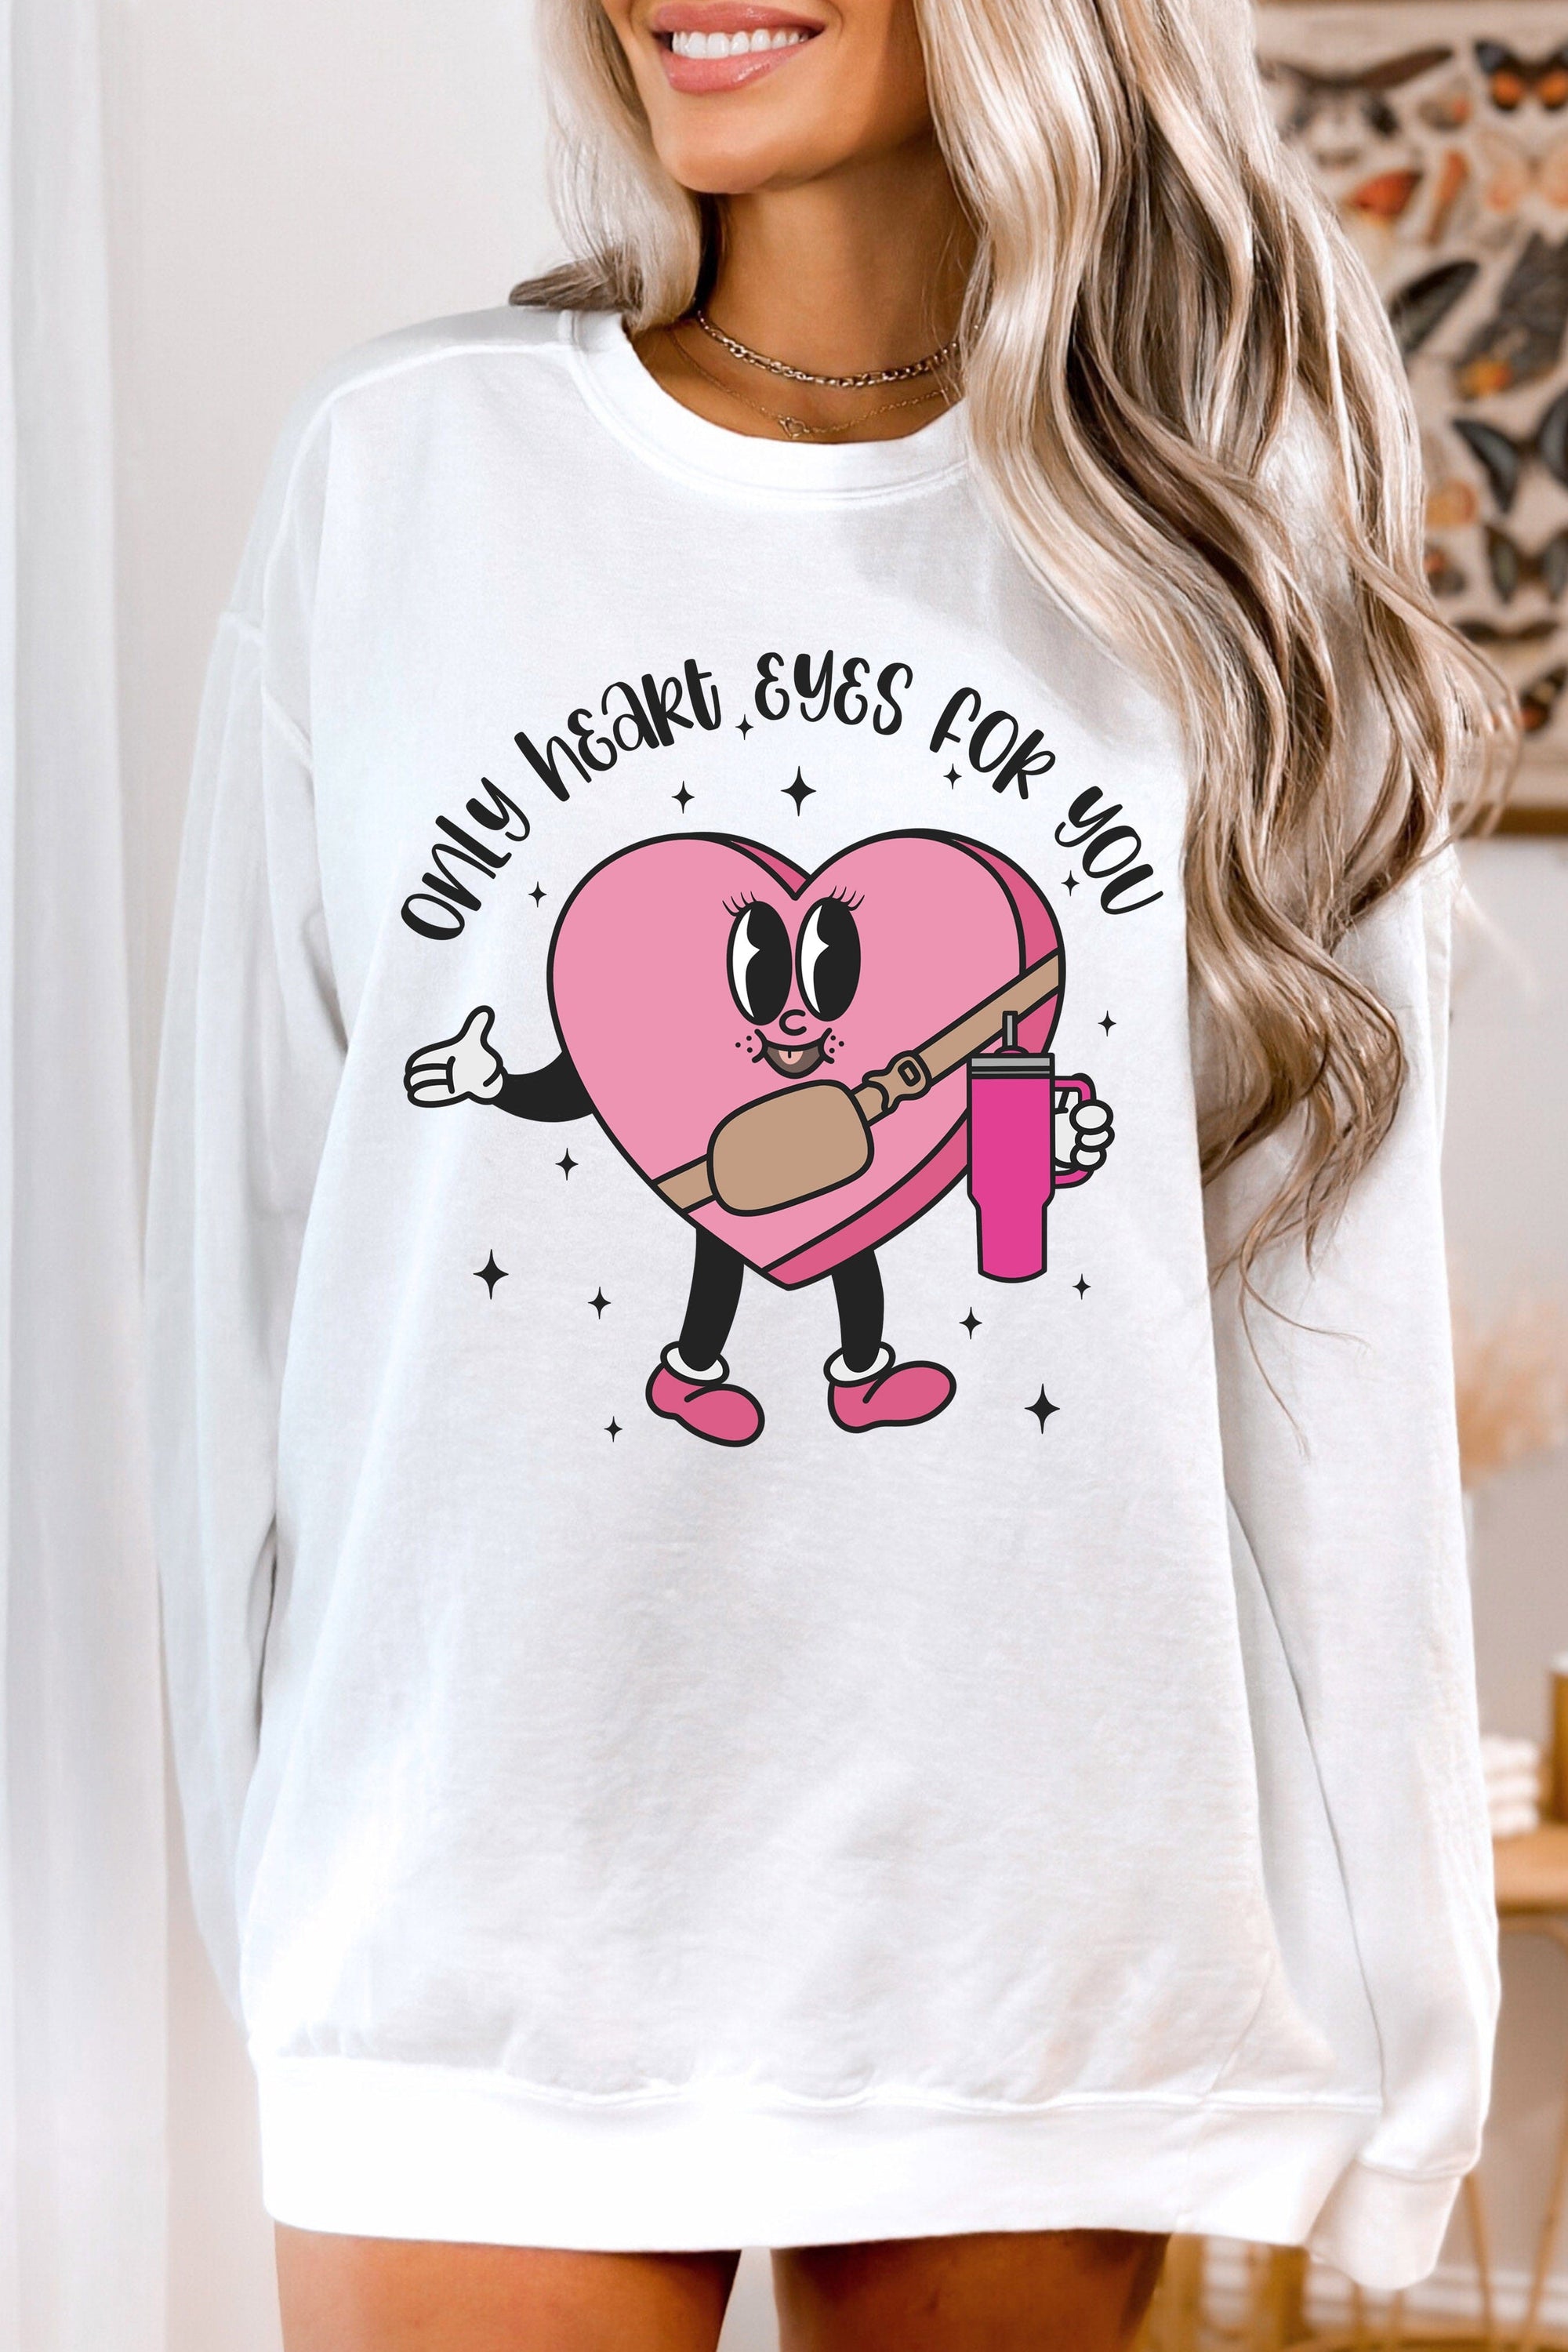 Only Heart Eyes For You Sweatshirt